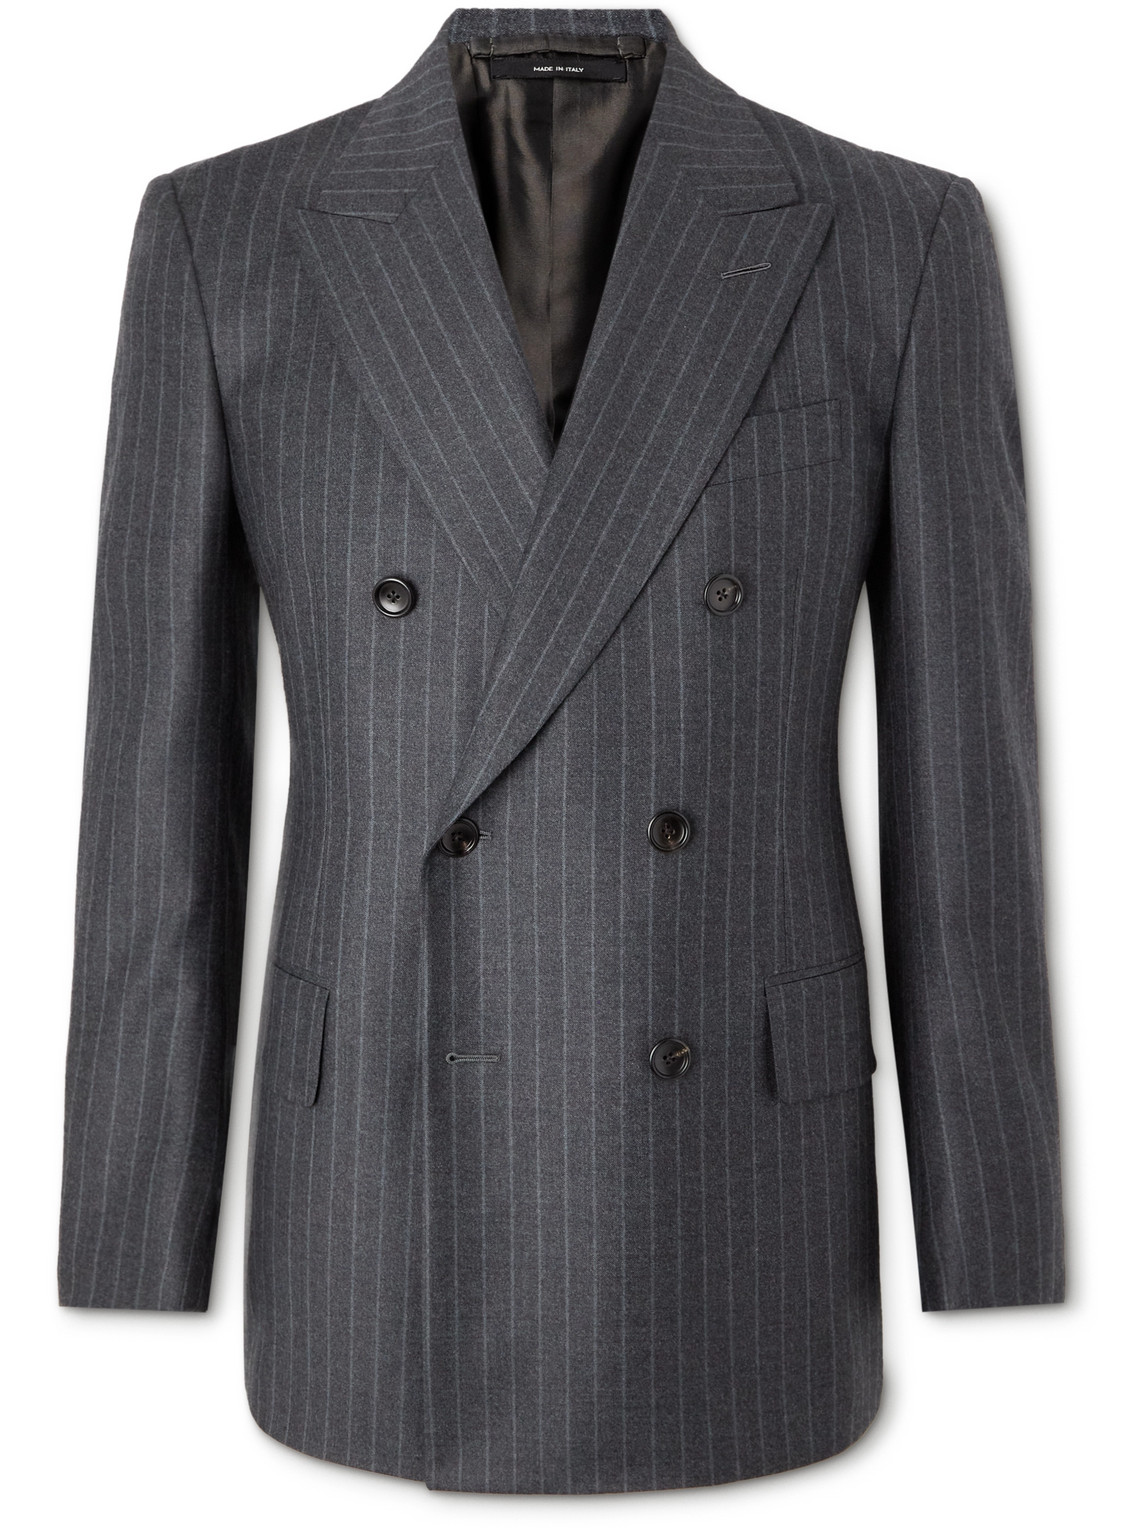 Tom Ford Double-Breasted Striped Wool and Silk-Blend Suit Jacket - Men - Dark Gray Suits - L